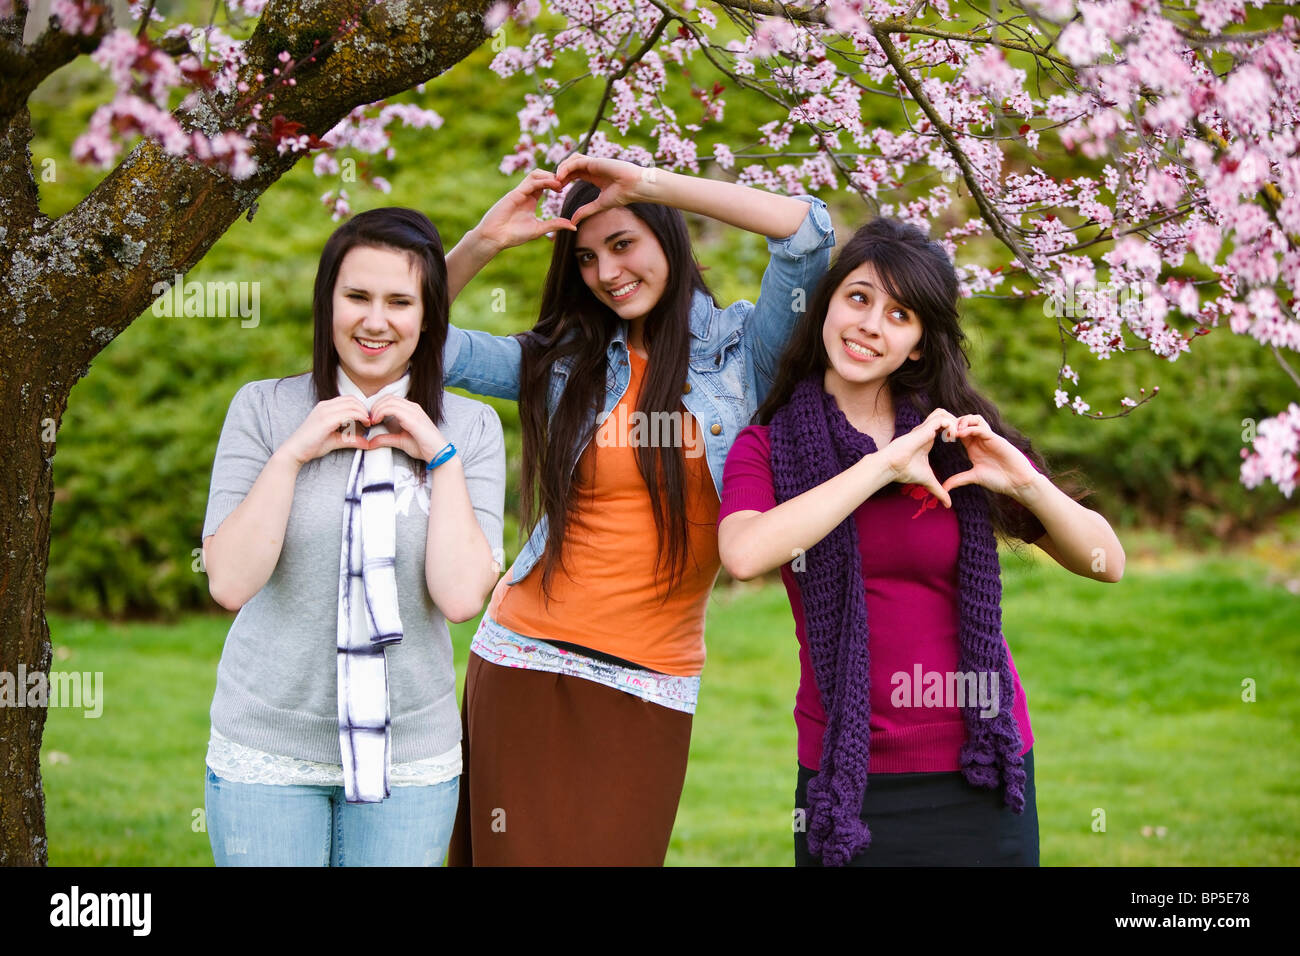 Portland, Oregon, United States Of America; Three Teenage Girls Making Heart Shapes With Their Hands In Portland Park Stock Photo